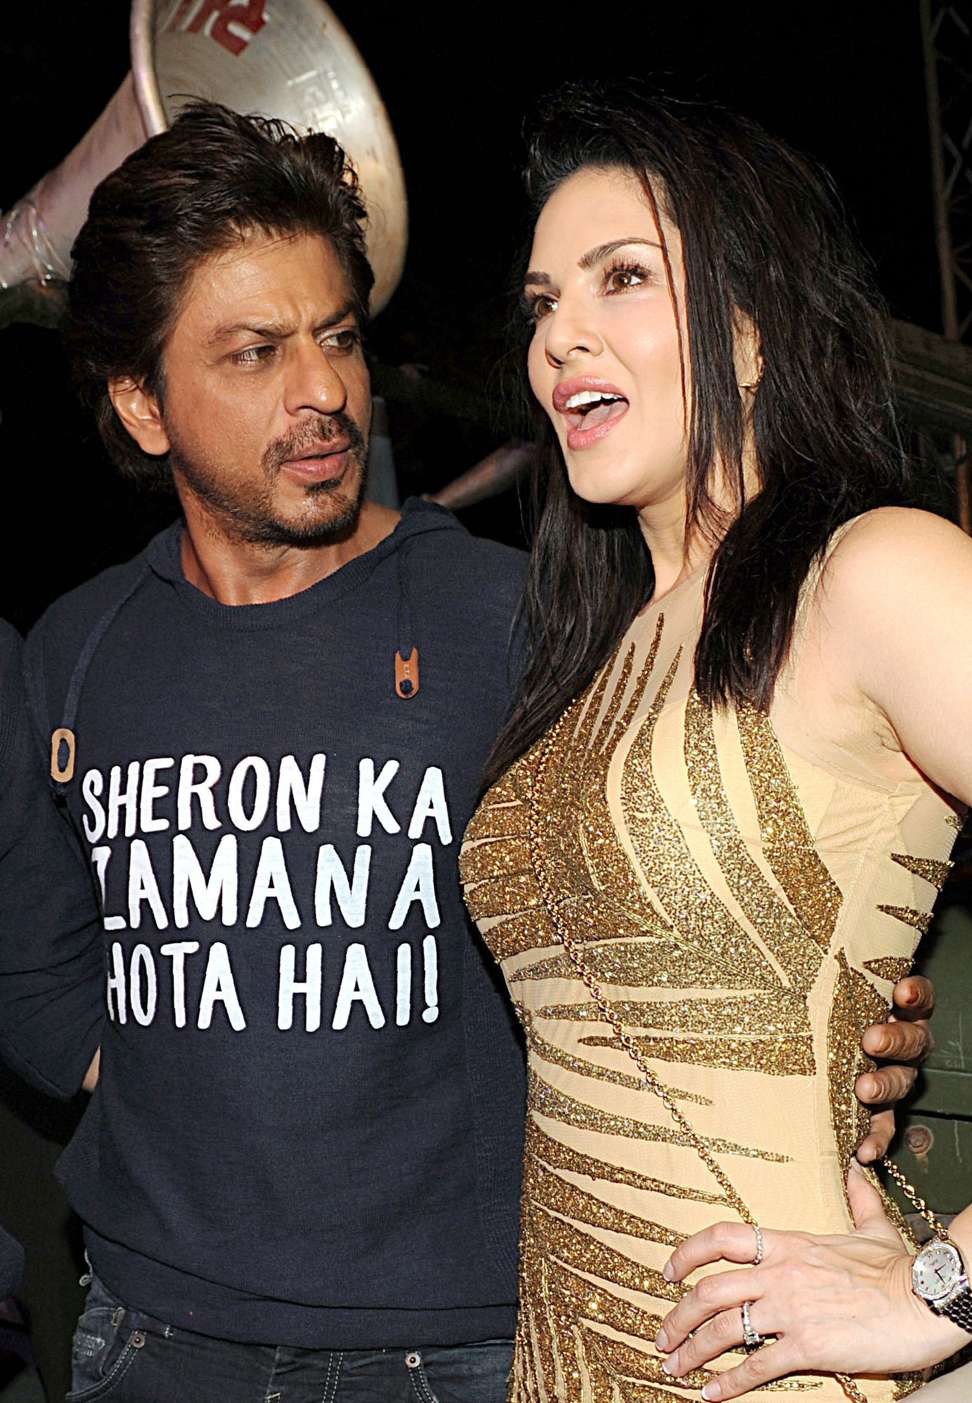 Indian Bollywood actors Shah Rukh Khan, left, and Sunny Leone promote their film Raees in Mumbai. Photo: AFP